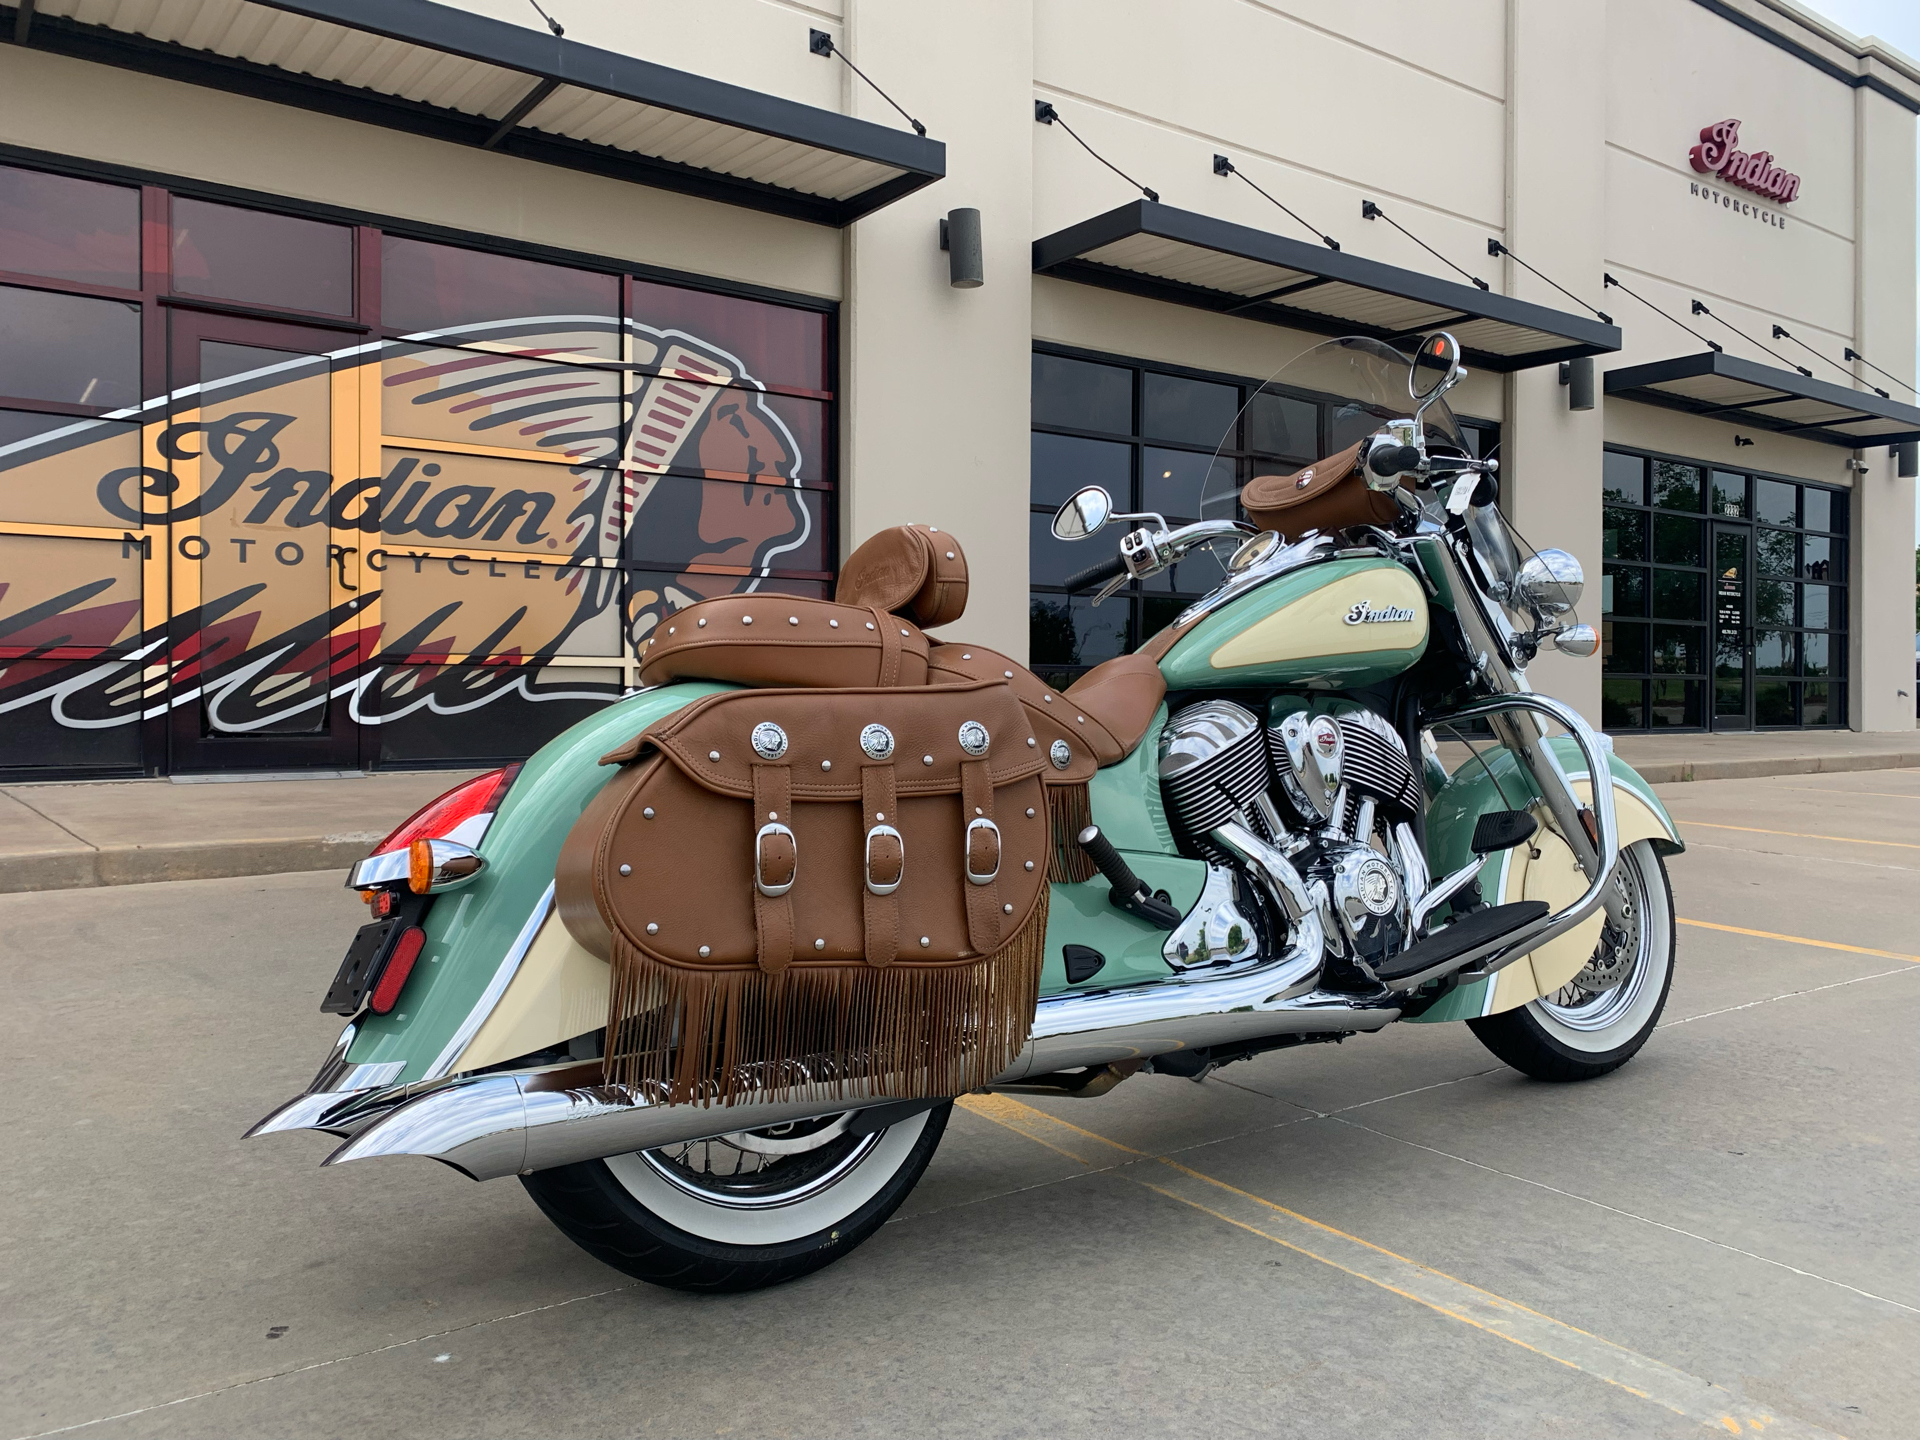 2019 Indian Chief® Vintage ABS in Norman, Oklahoma - Photo 8